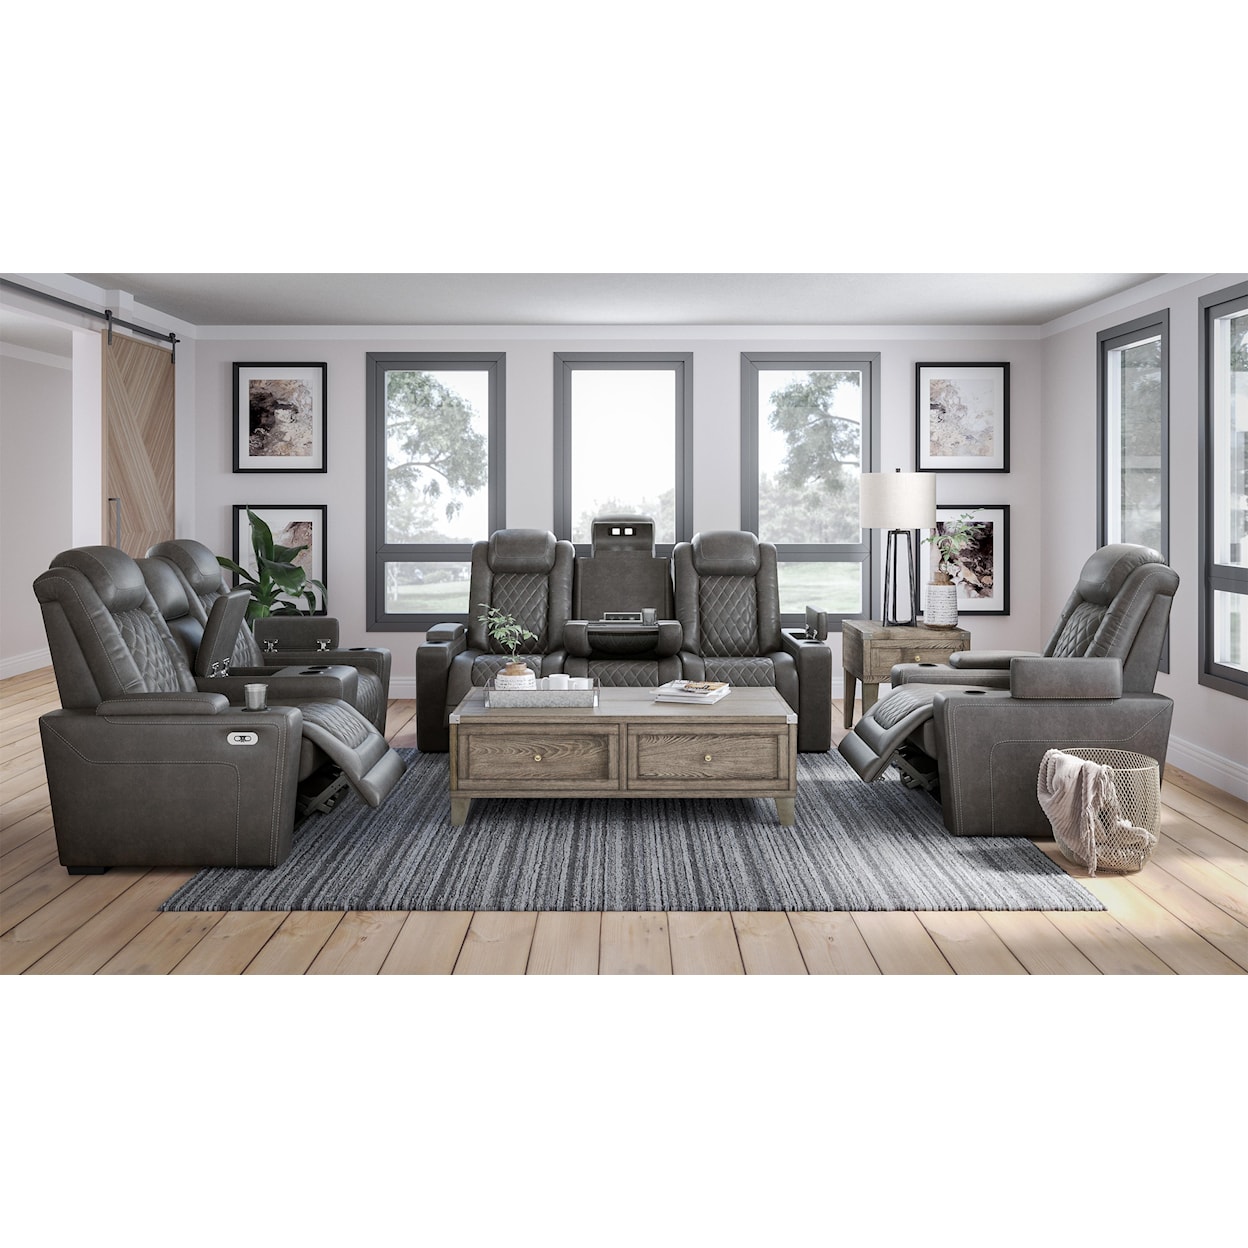 Signature Design by Ashley Hyllmont Power Reclining Sofa and Power Recliner Chai